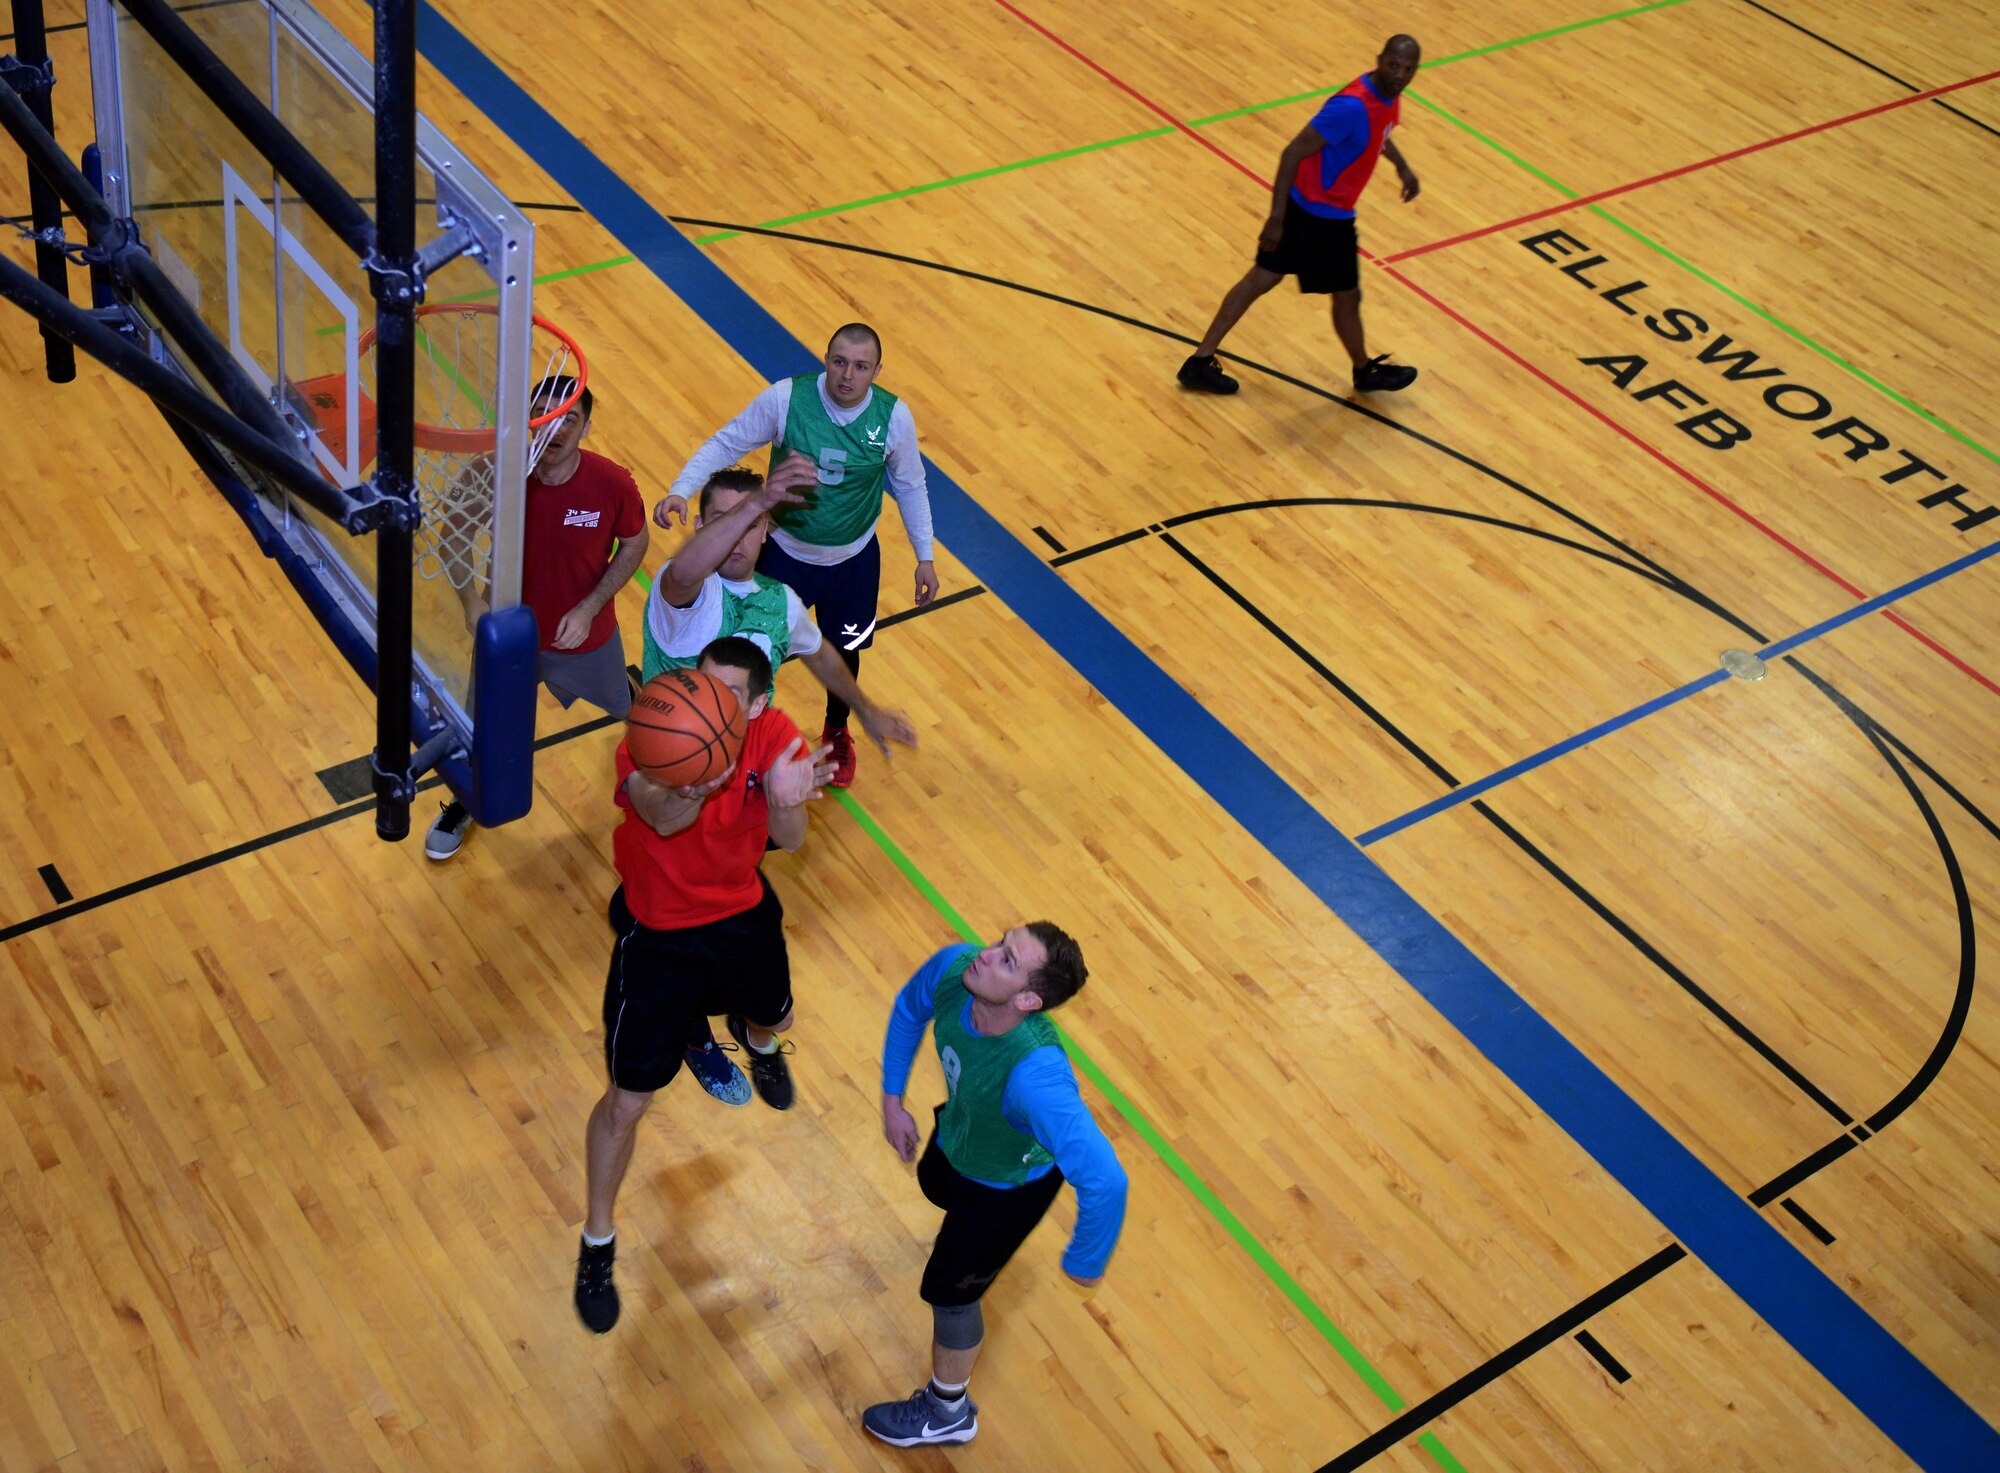 Airmen compete in a game of basketball during a semi-annual Wingman Day at Ellsworth Air Force Base, S.D., April 28, 2017. Events included hiking, paintball, basketball and other sporting activities that focused on developing Airmen physically and socially. (U.S. Air Force photo by Airman 1st Class Donald C. Knechtel)